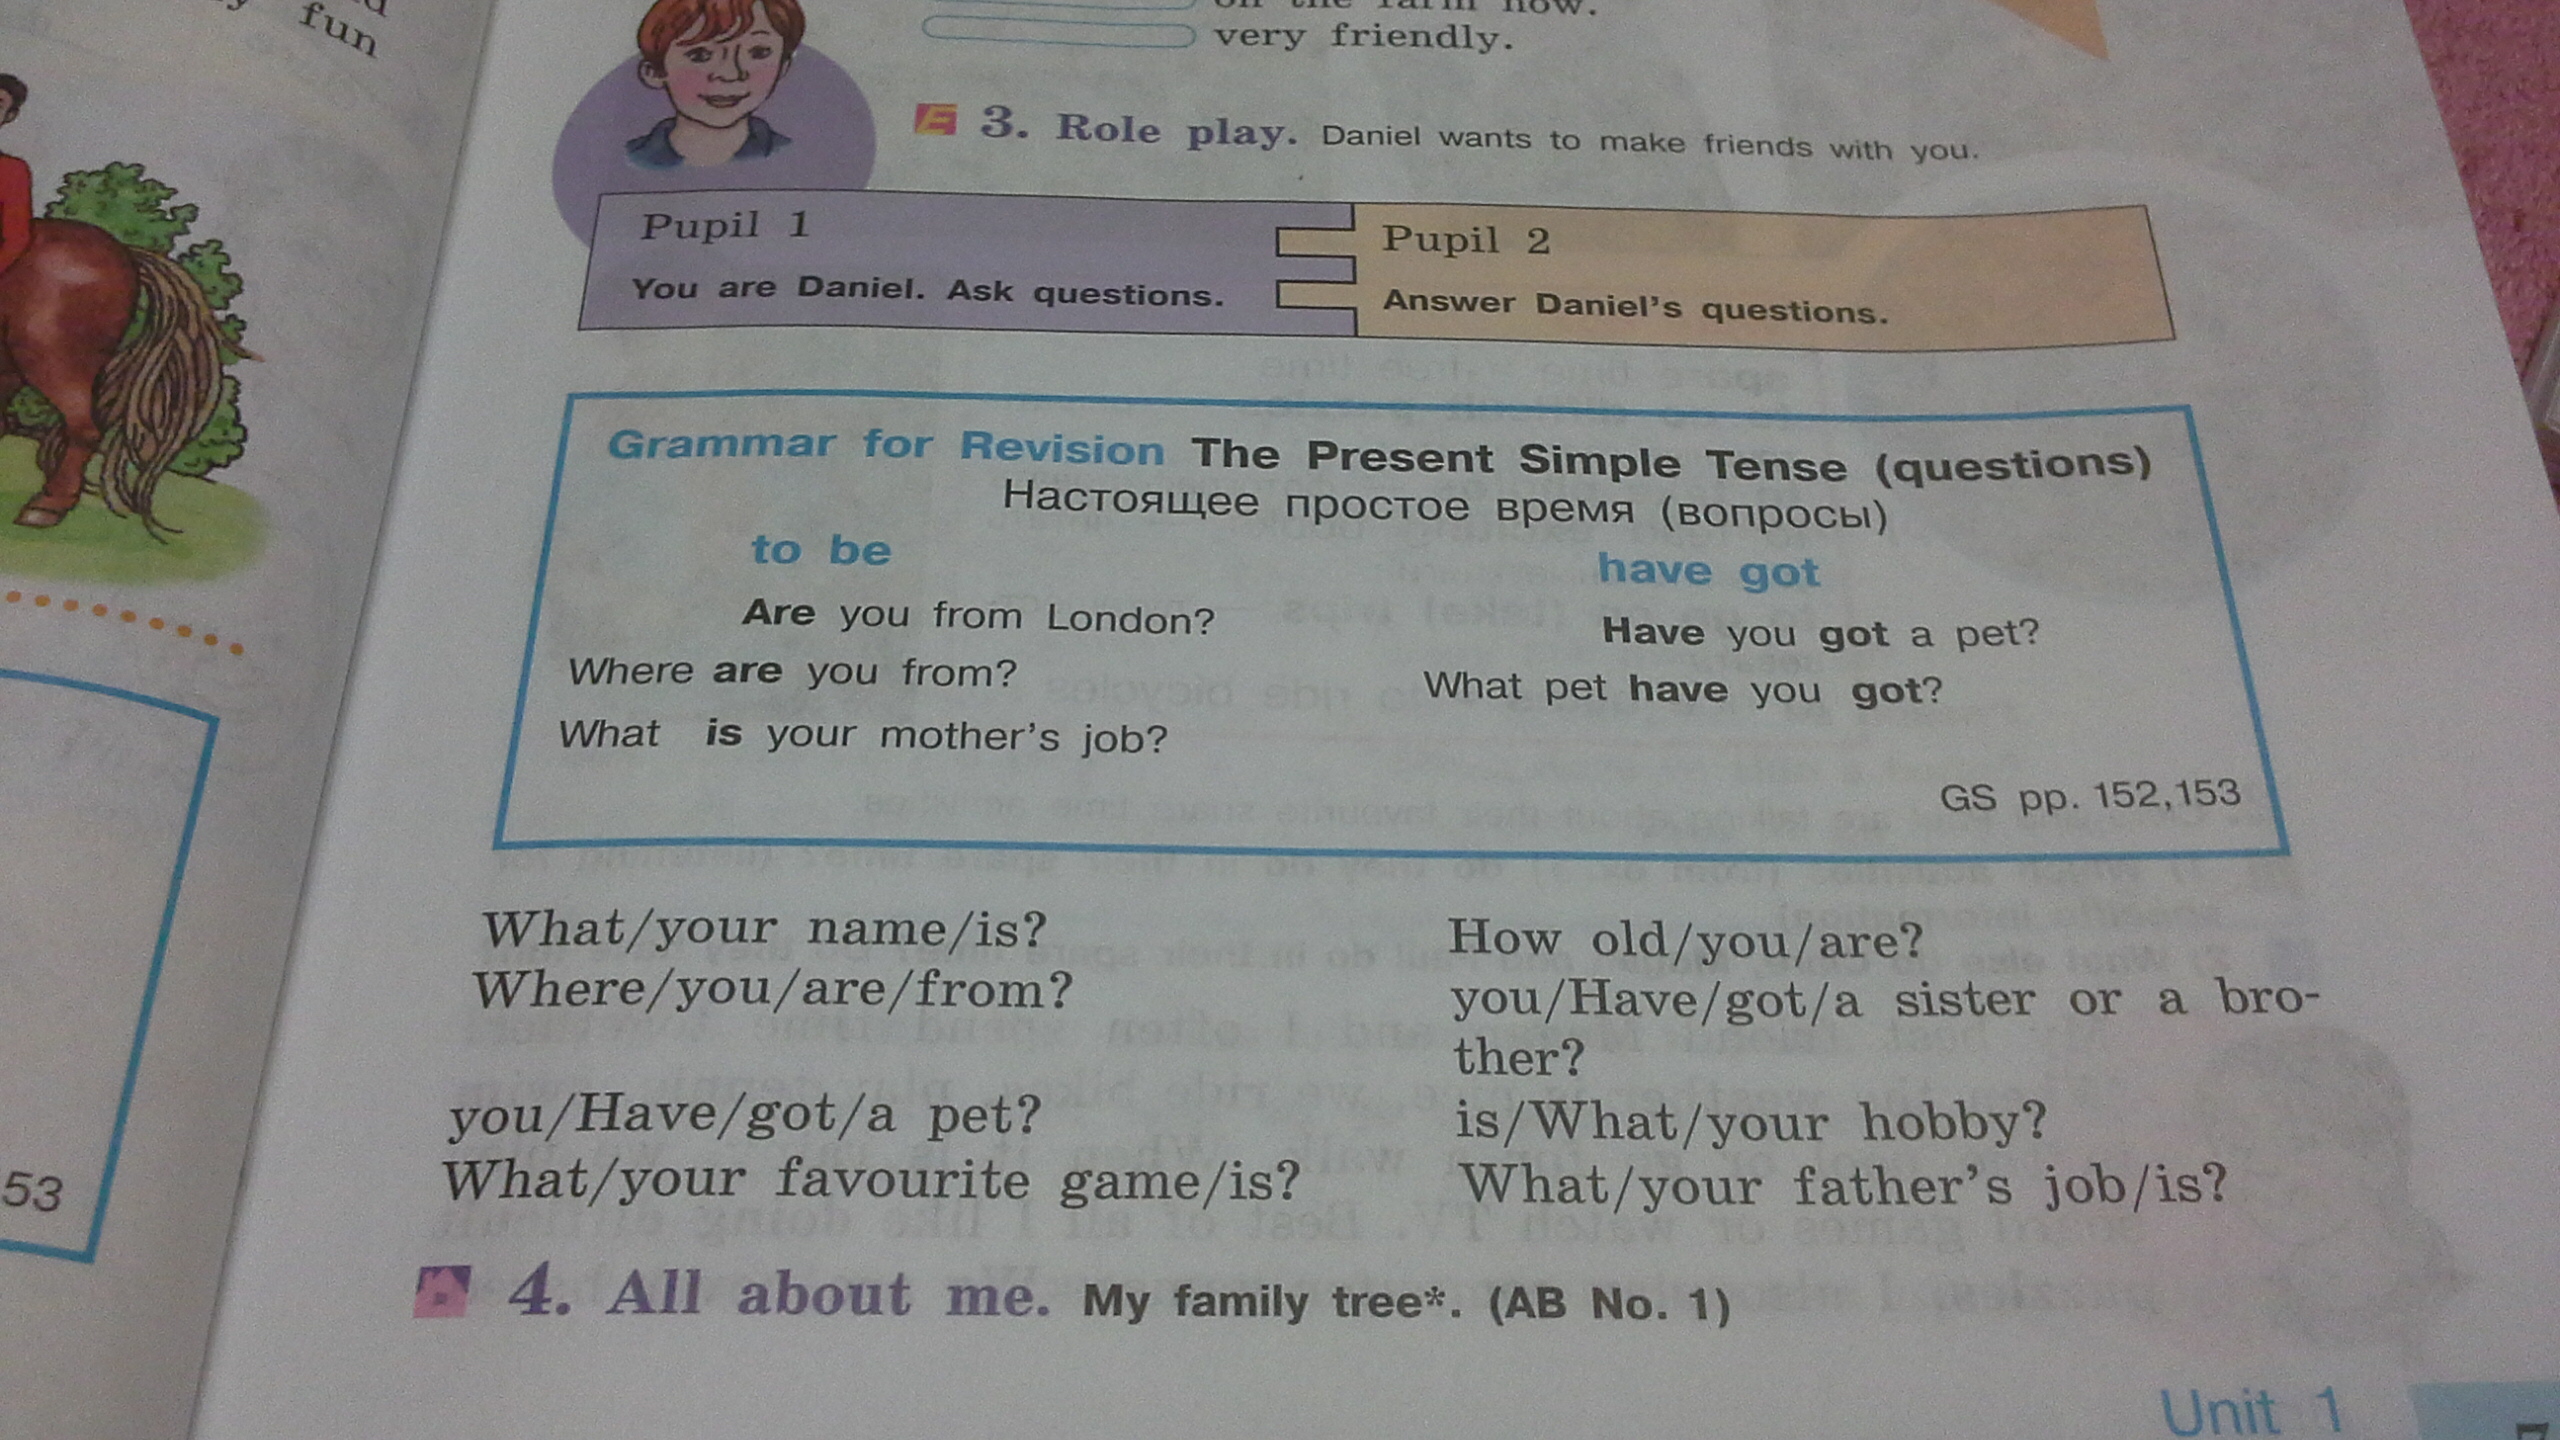 Here to make friends. Past simple Tense Test.